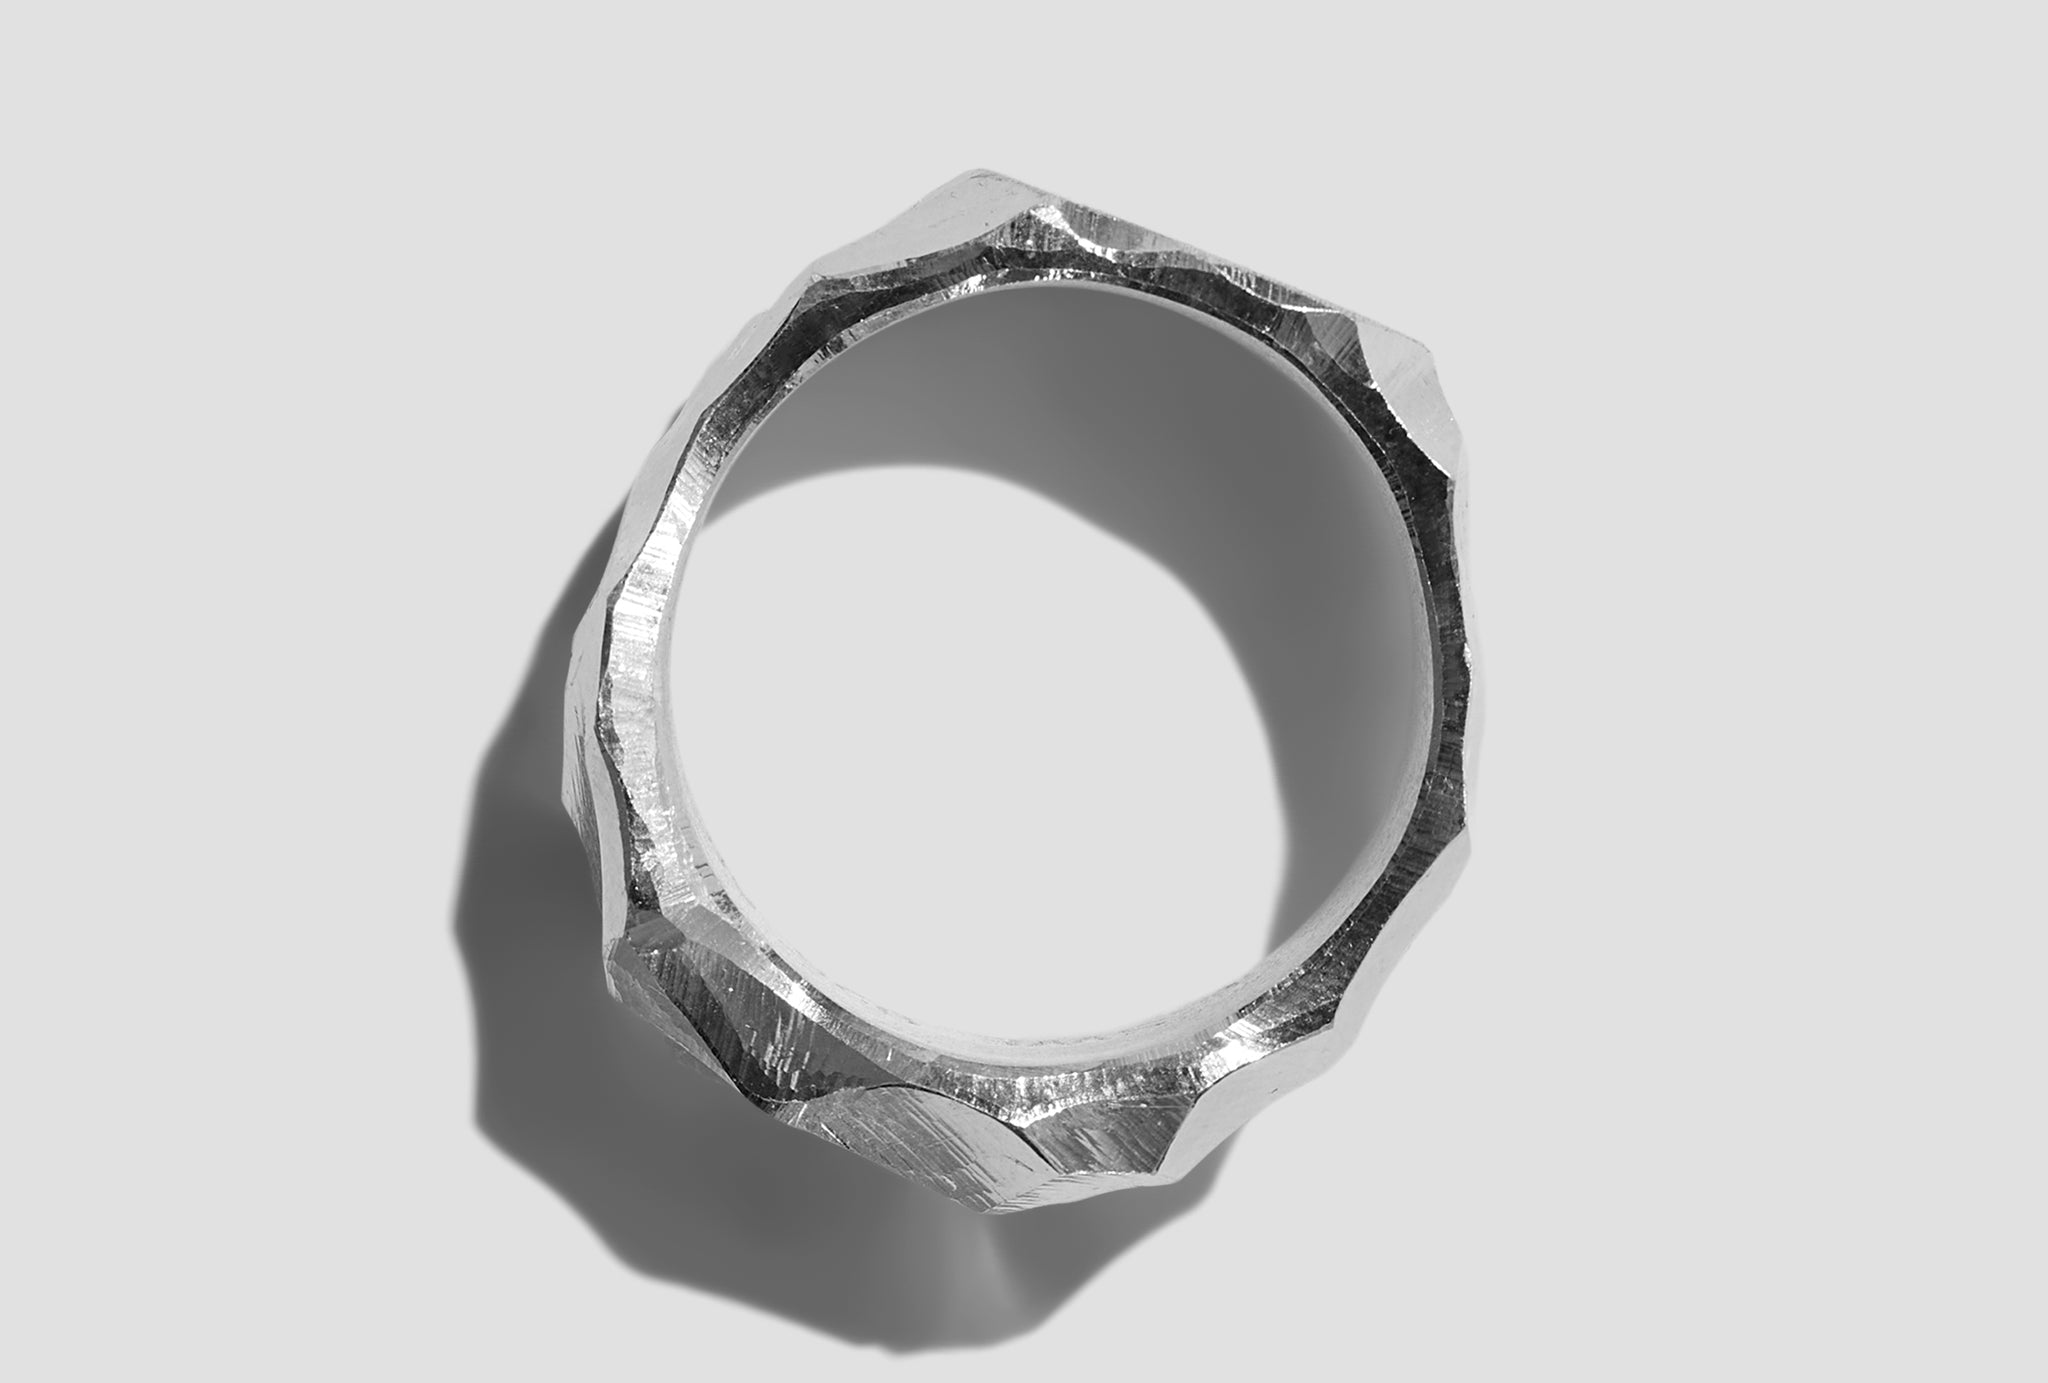 RAUK RING NARROW - CARVED / STERLING SILVER 101483 Silver